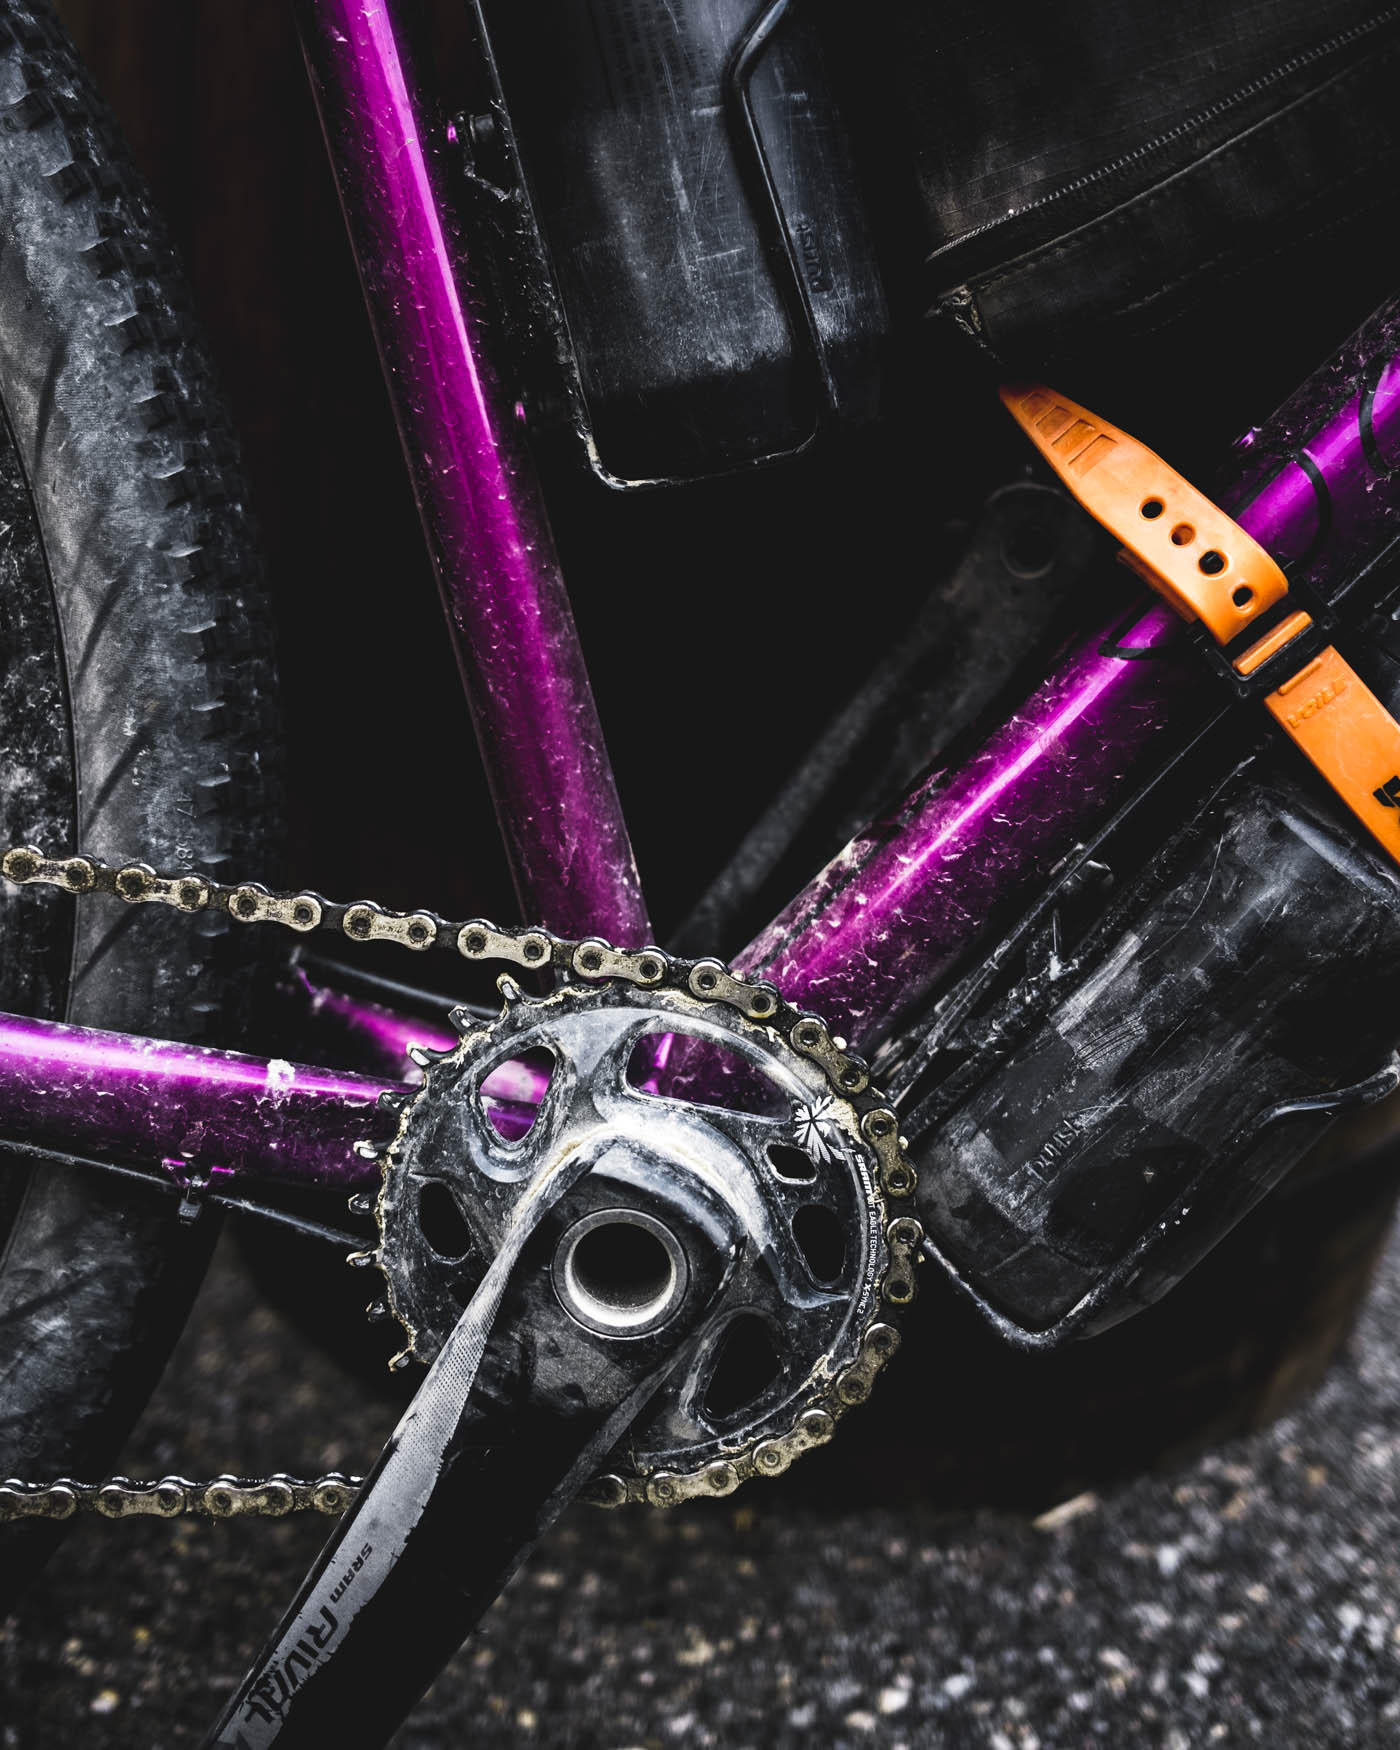 The dusty chainring and chain of my gravel bike